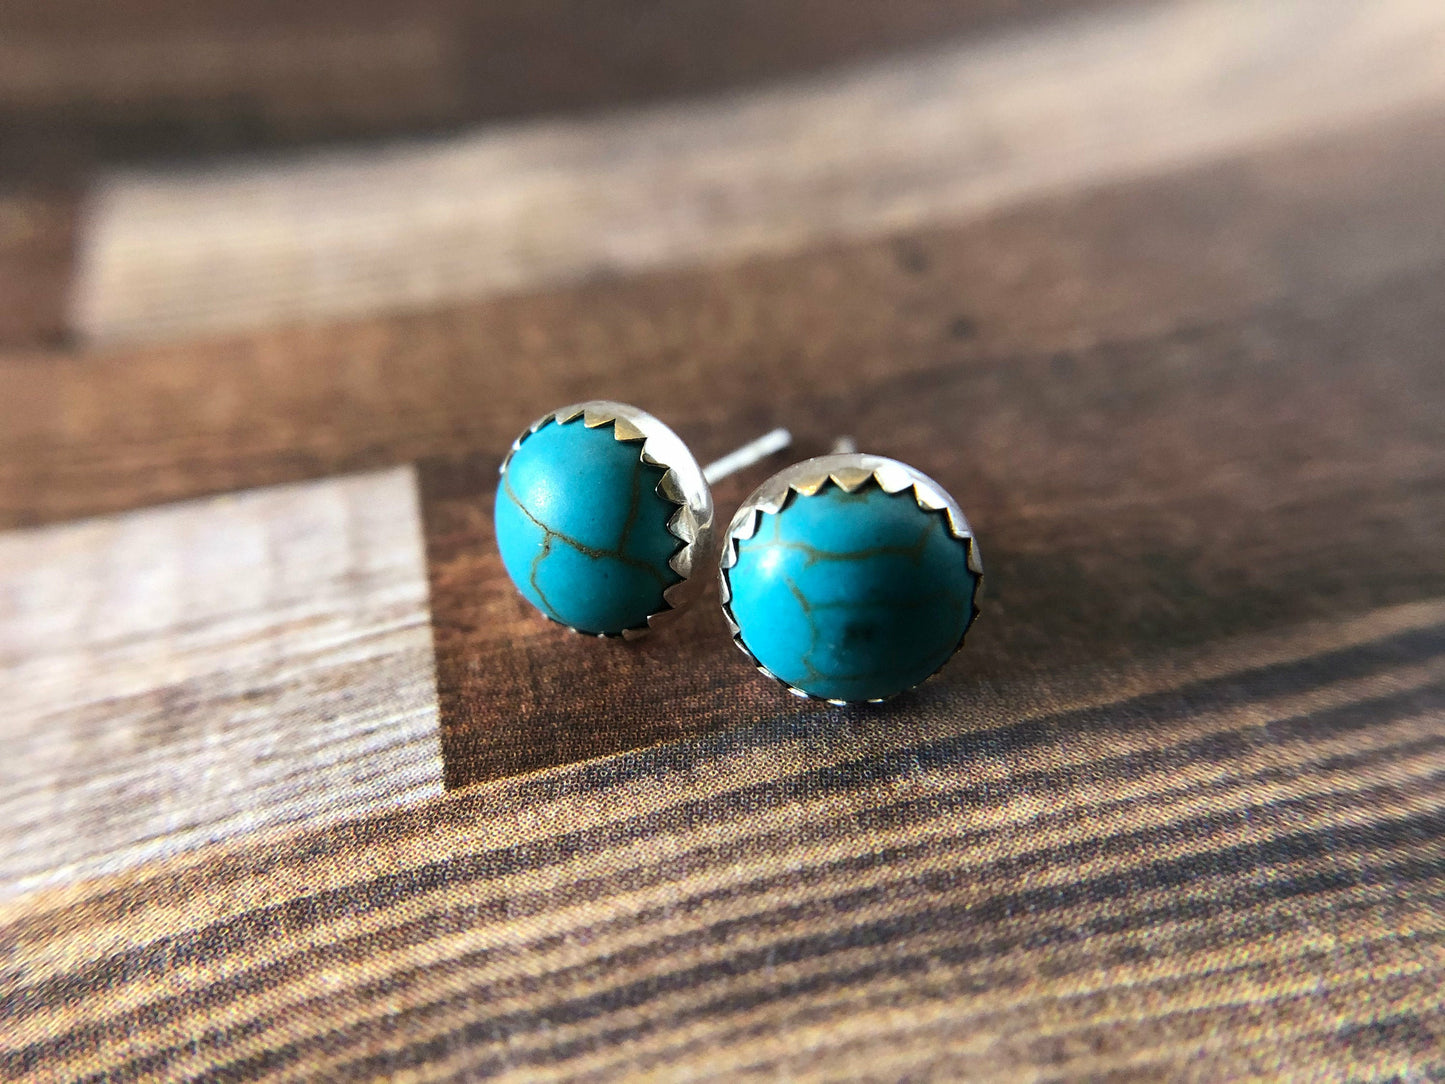 sterling-silver-turquoise-earrings-silver-turquoise-studs-silver-studs-studs-turquoise-studs-silver-earrings-gifts-for-her-blue-earrings